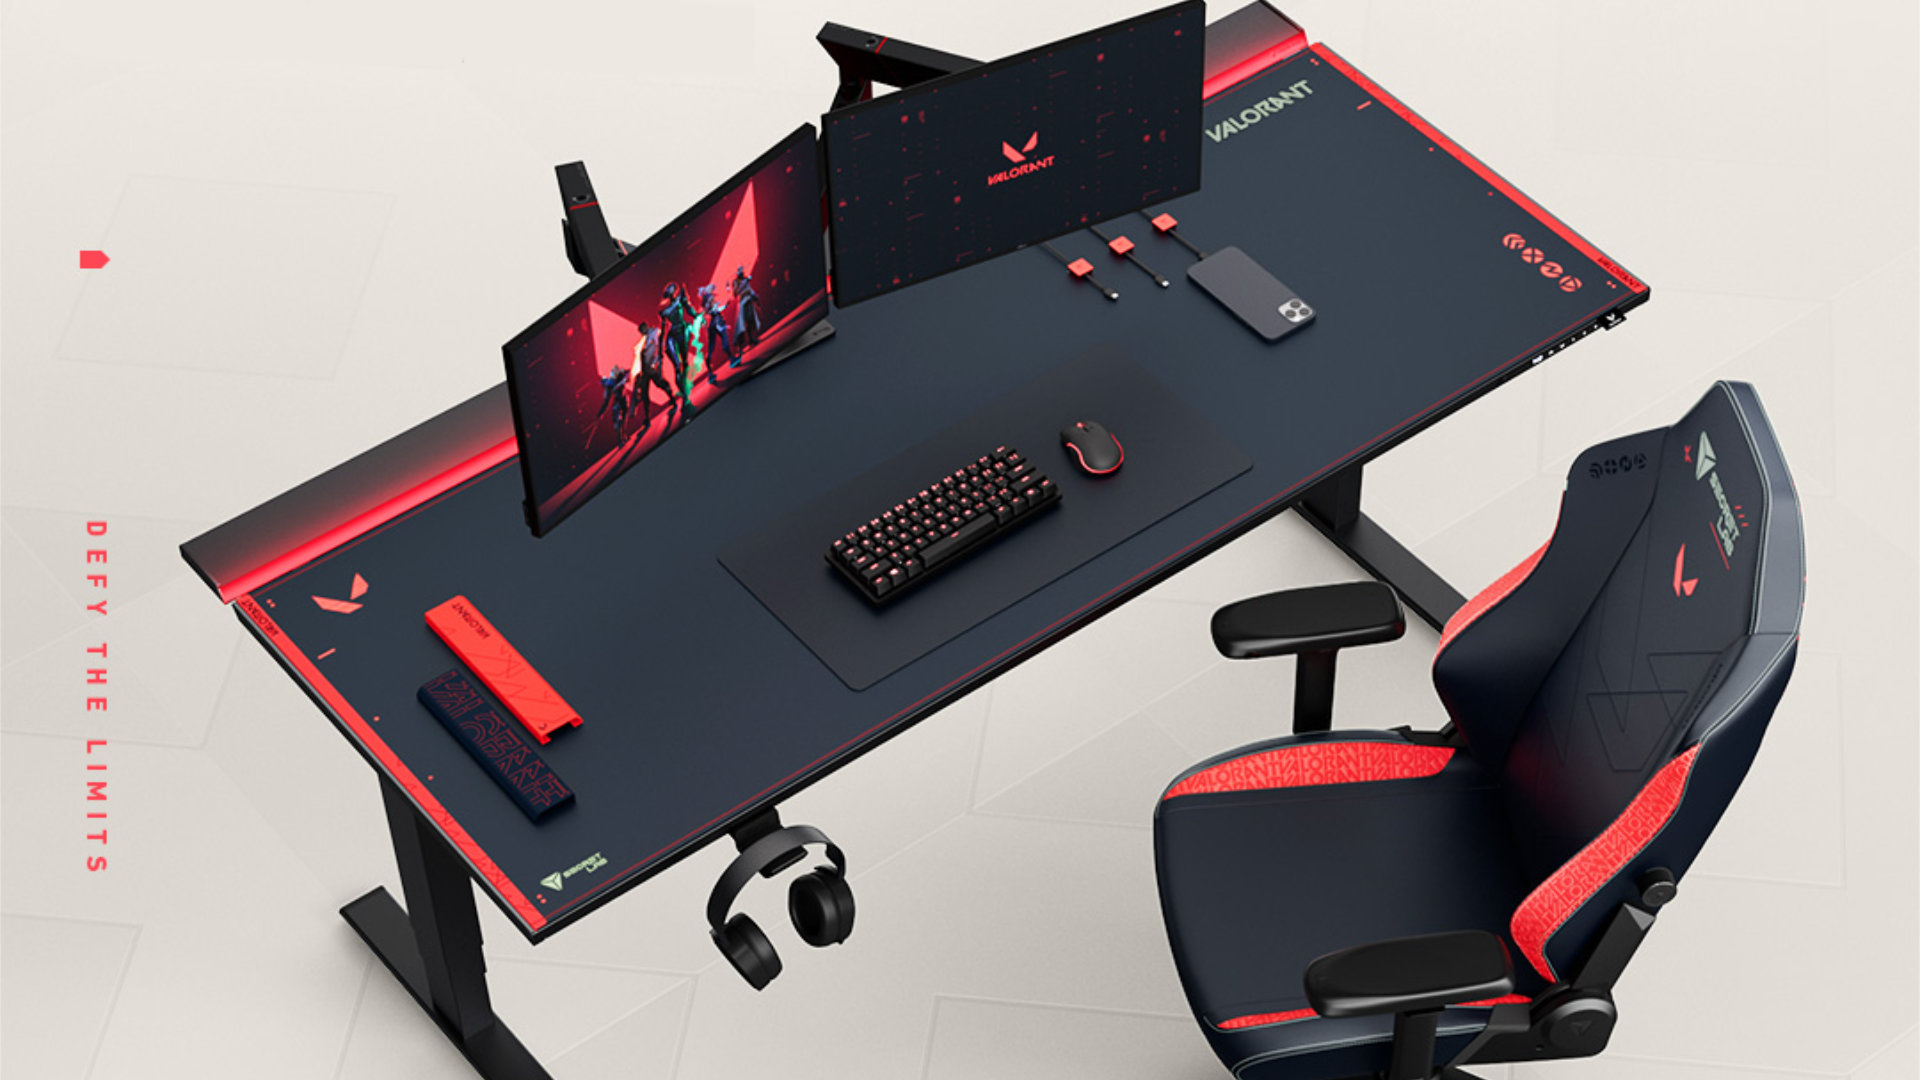 These Secretlab Valorant chairs are a must-have for duelists